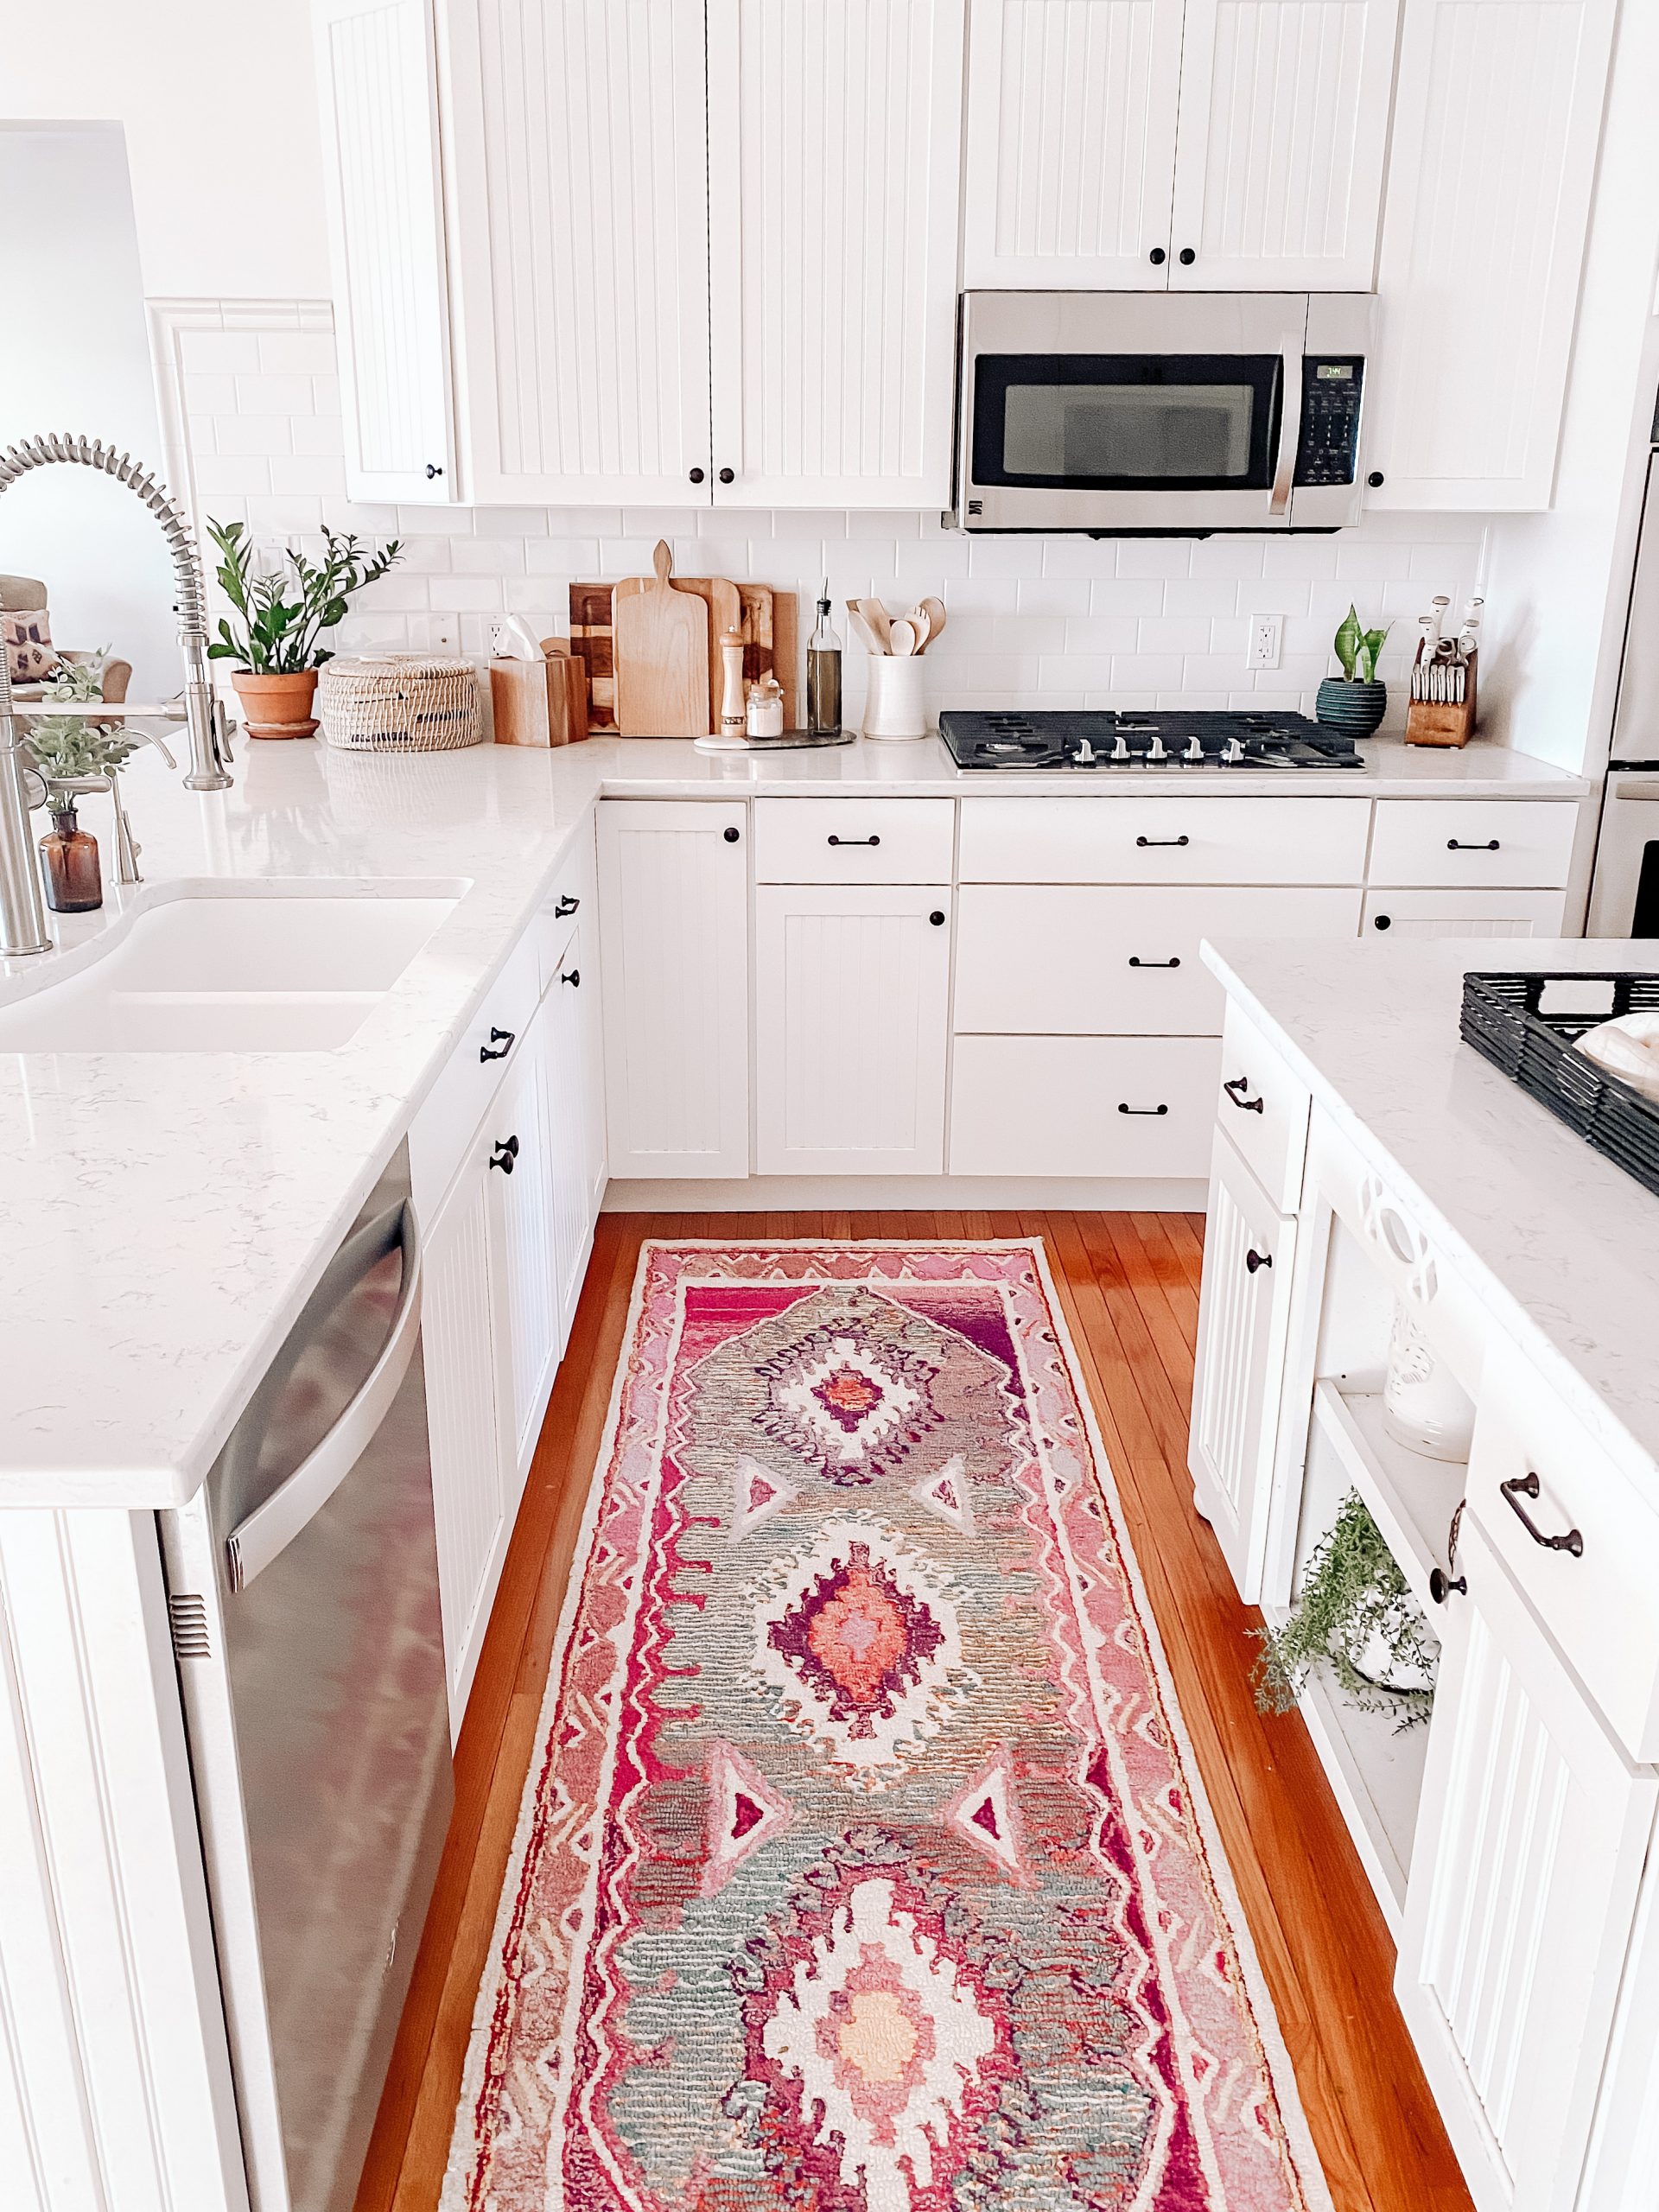 The Best Rugs For Your Kitchen Usa, Kitchen Runners For Hardwood Floors